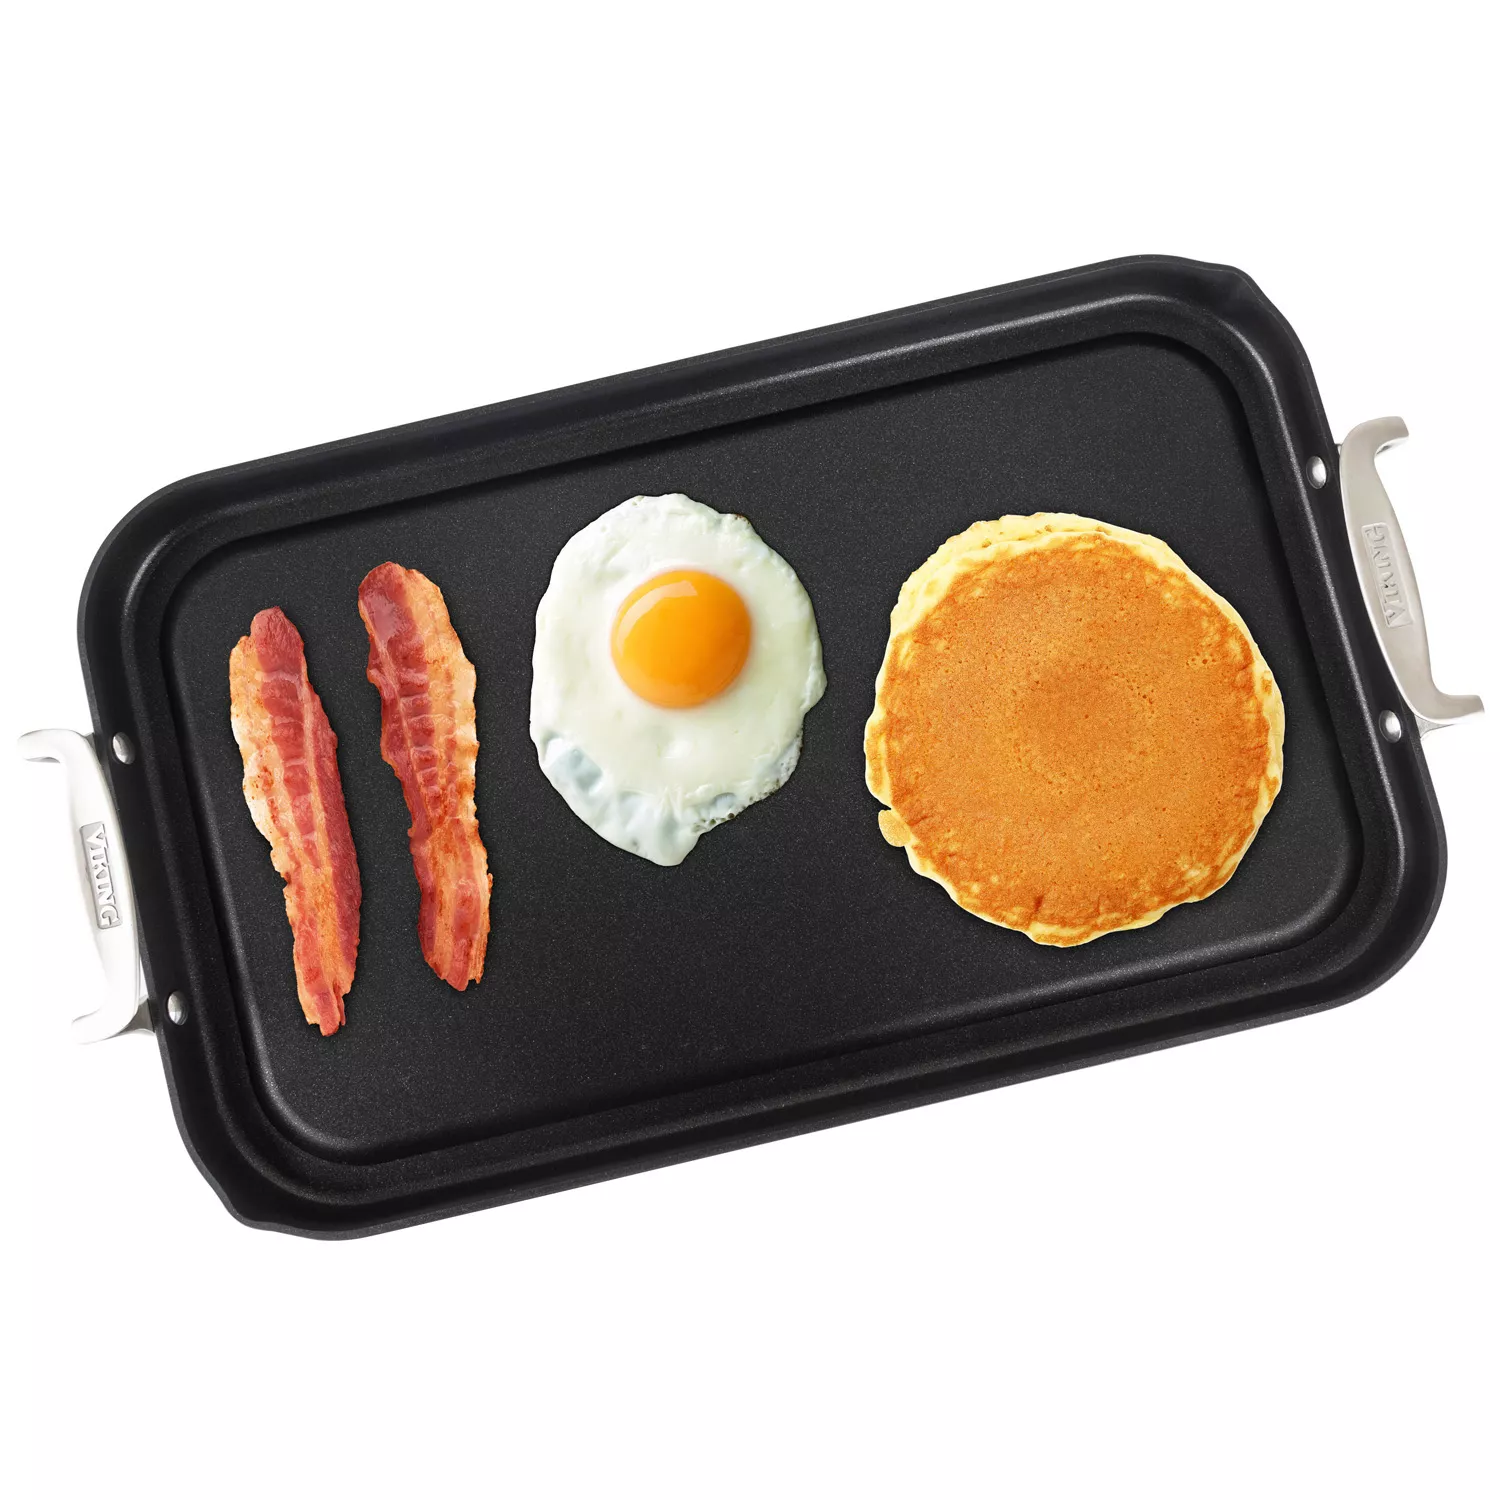 Cuisinart Chef's Classic Hard Anodized Nonstick Double Burner Griddle